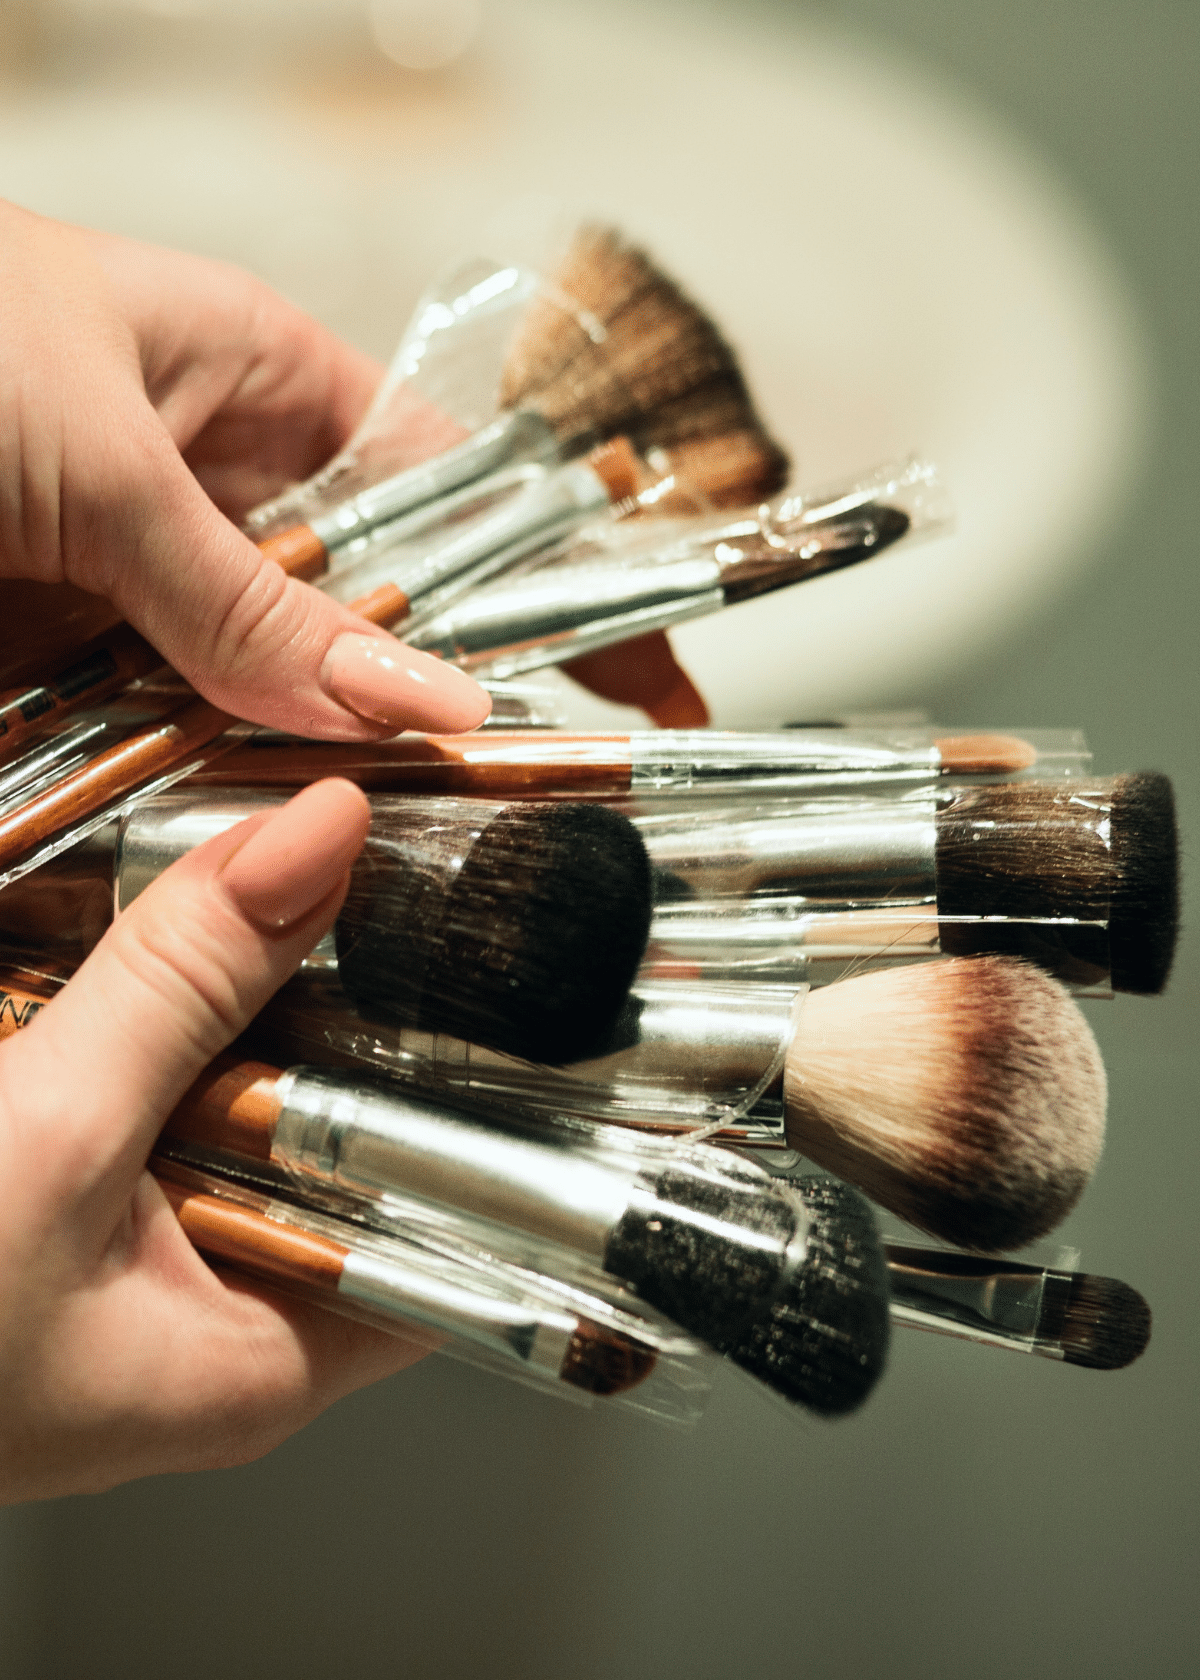 2% Of People Know The Right Way To Clean Makeup Brushes